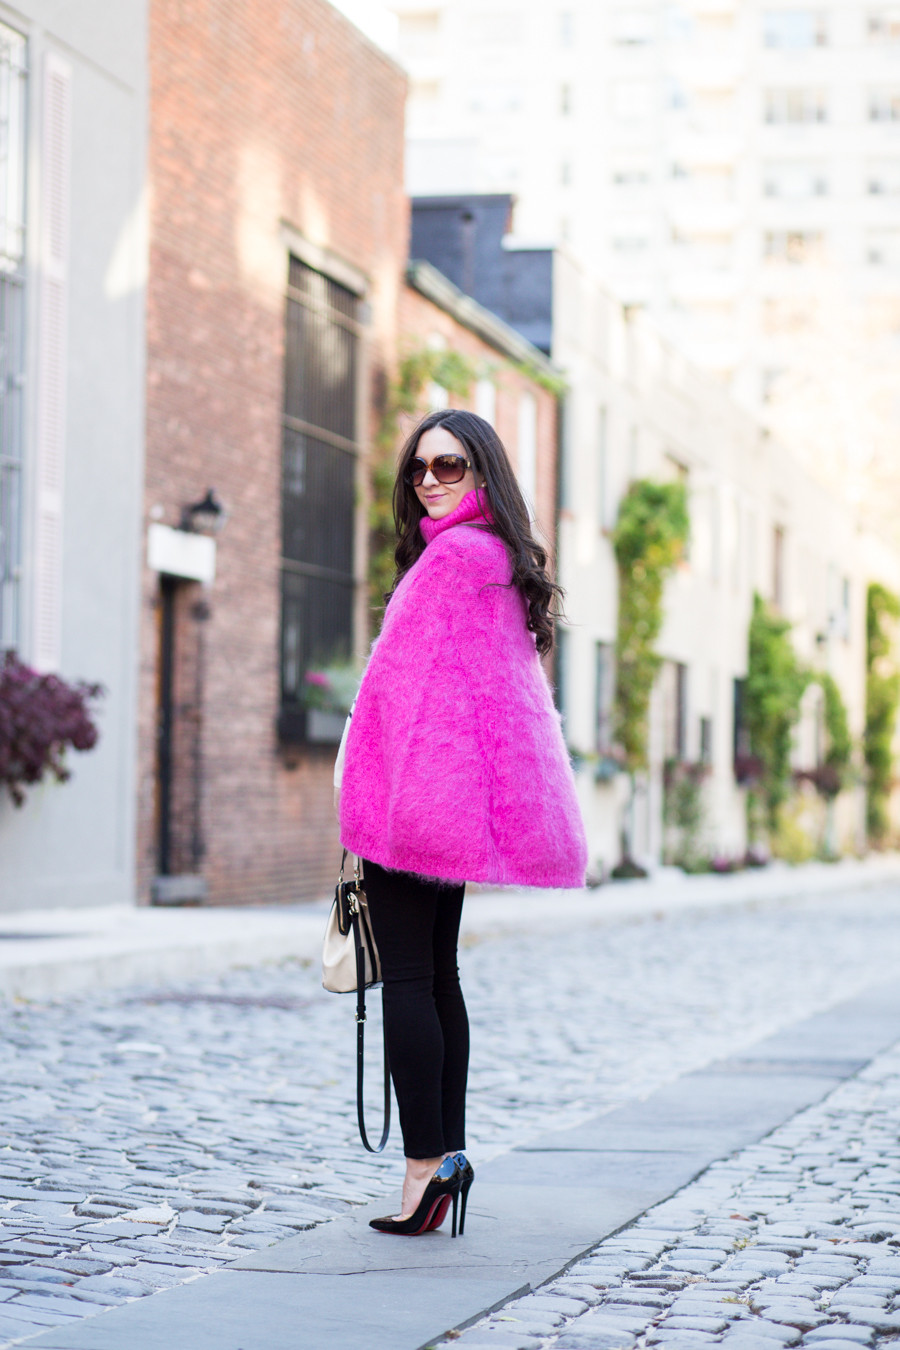 Kate Spade Chunky Knit Sweater Cape, Kate Spade Cape, Pink Cape, Pink Sweater Cape, Bright Pink Sweater Cape, Poncho, Bright Pink Poncho, Christian Louboutin Pigalle 120 mm, Pigalle Black Patent Leather, Pigalle 120 mm, Parker Smith Jean, Parker Smith Jeans Black, Parker Smith Jeans Ava in Eternal Black, J.Crew Factory Striped Button Mockneck Sweater, J.Crew Factory Mockneck Sweater, Factory Striped Turtleneck, Black and White Turtleneck, Black and White Striped Turtleneck